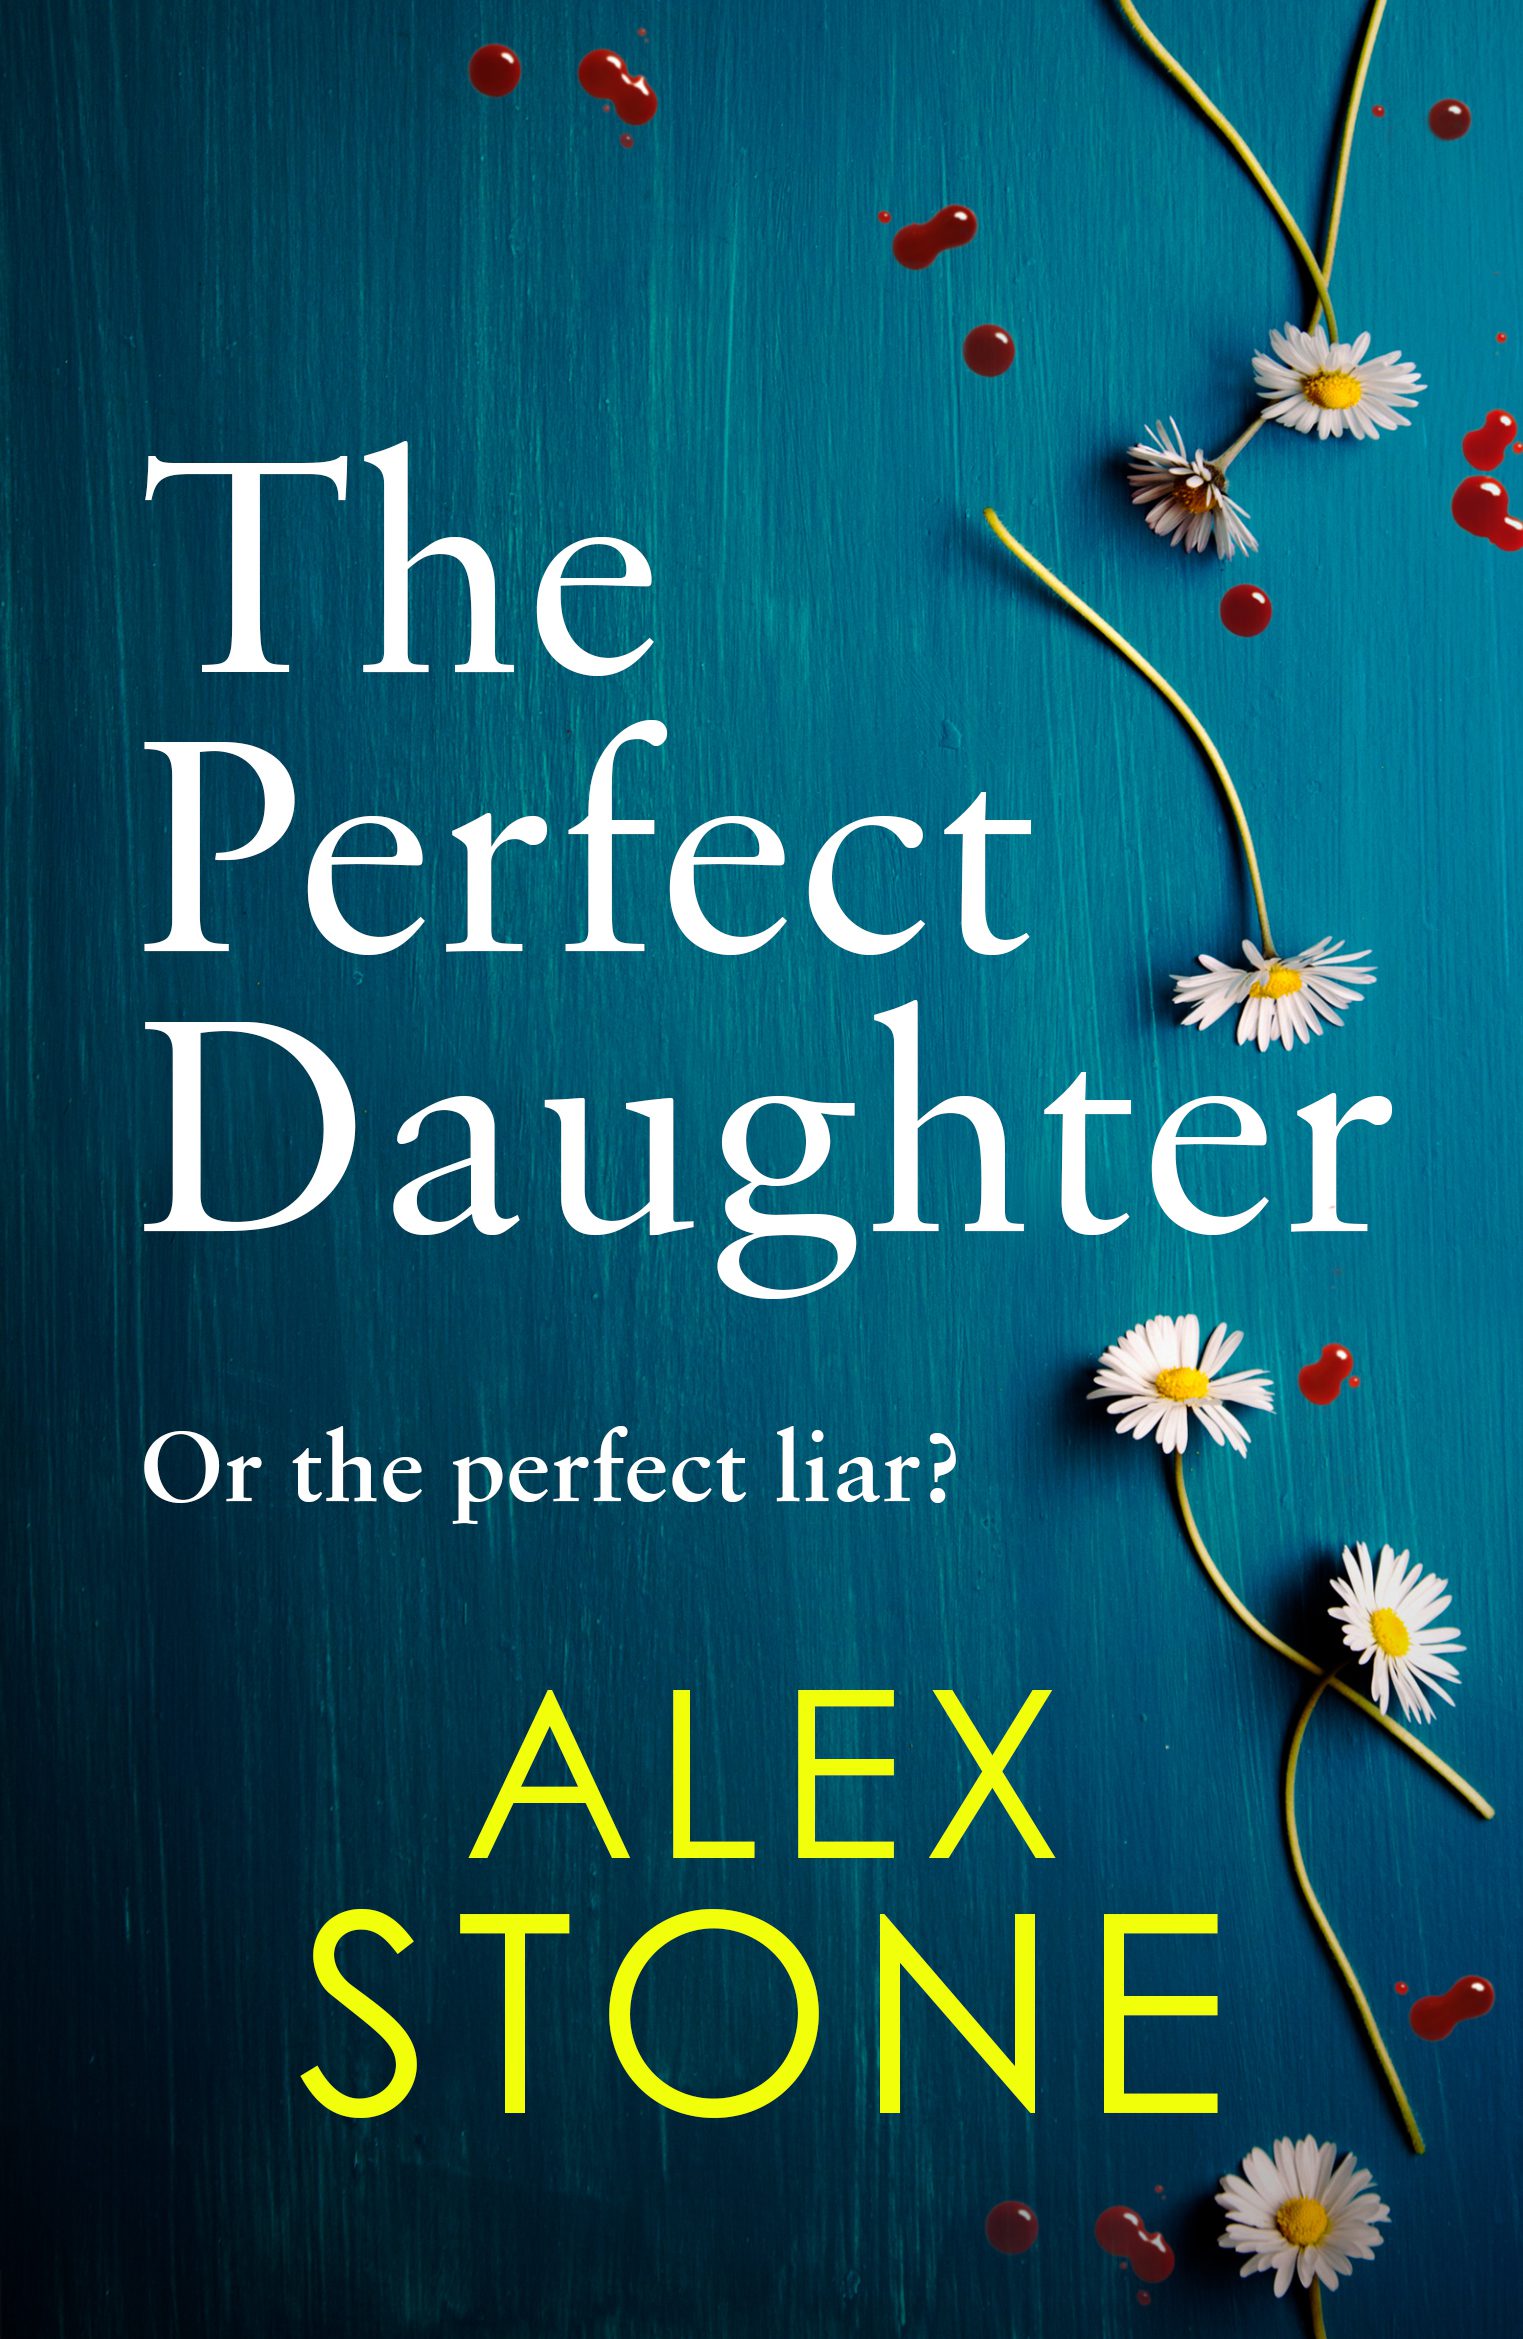 The Perfect Daughter book cover